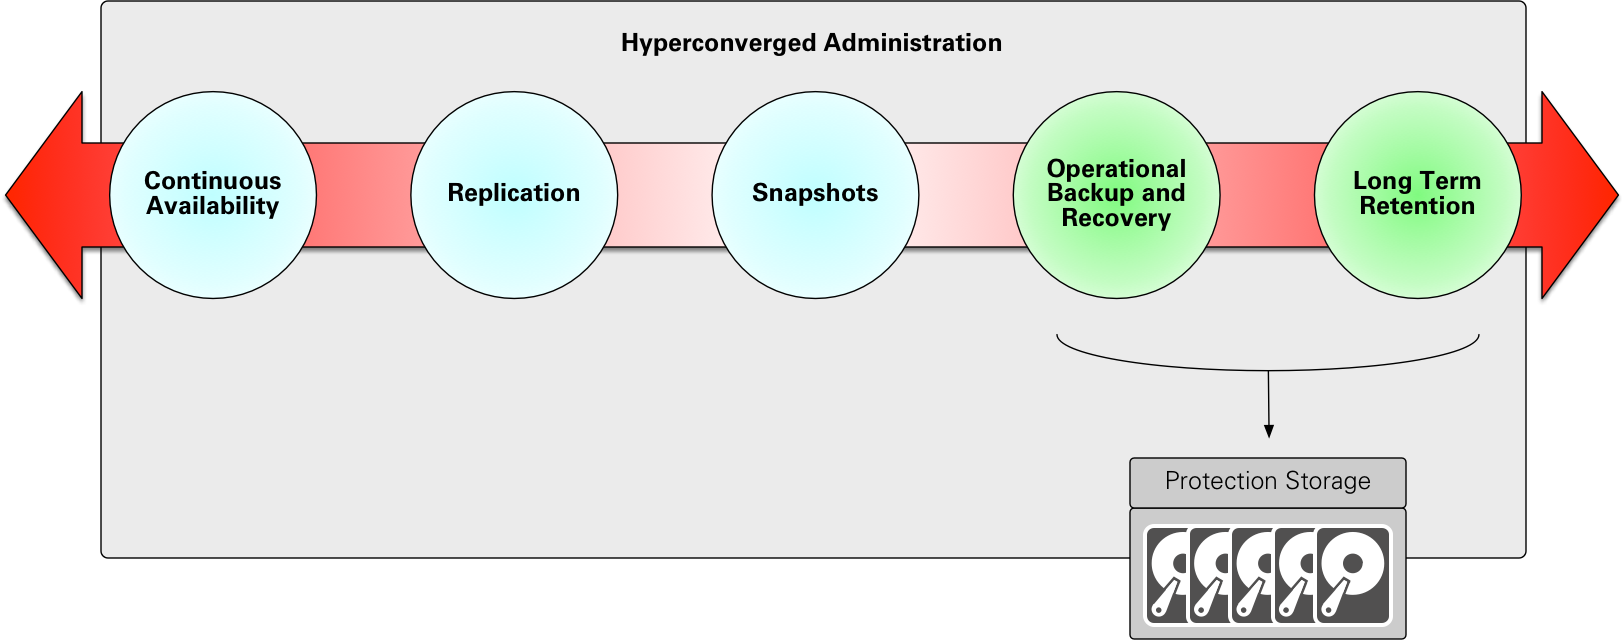 Hyperconverged Administration